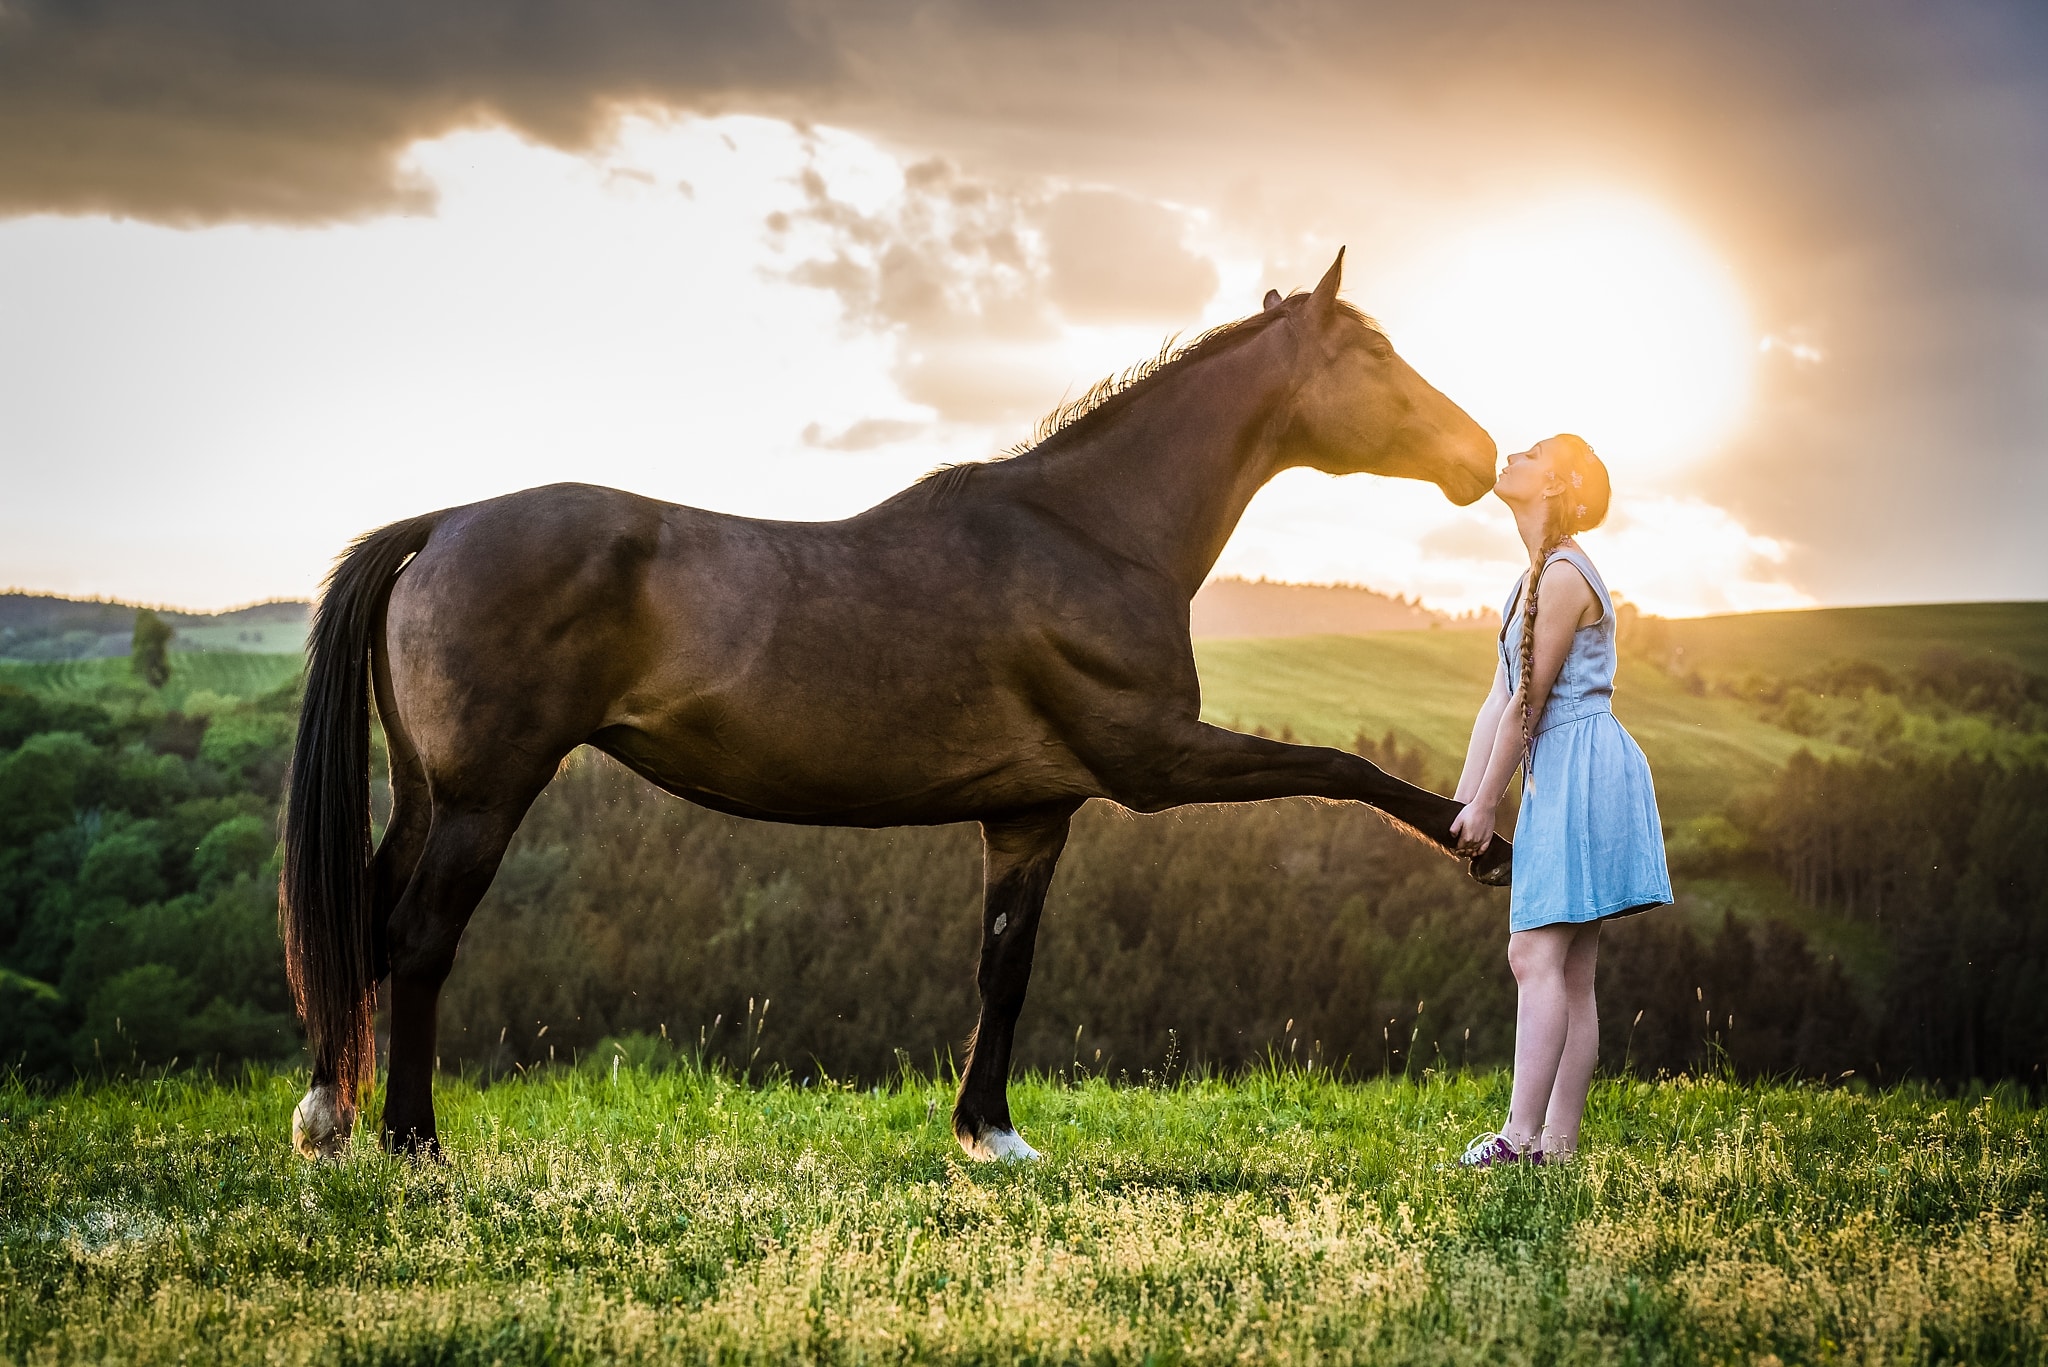 Download A Girl Poses With A Horse In A Field Wallpaper | Wallpapers.com